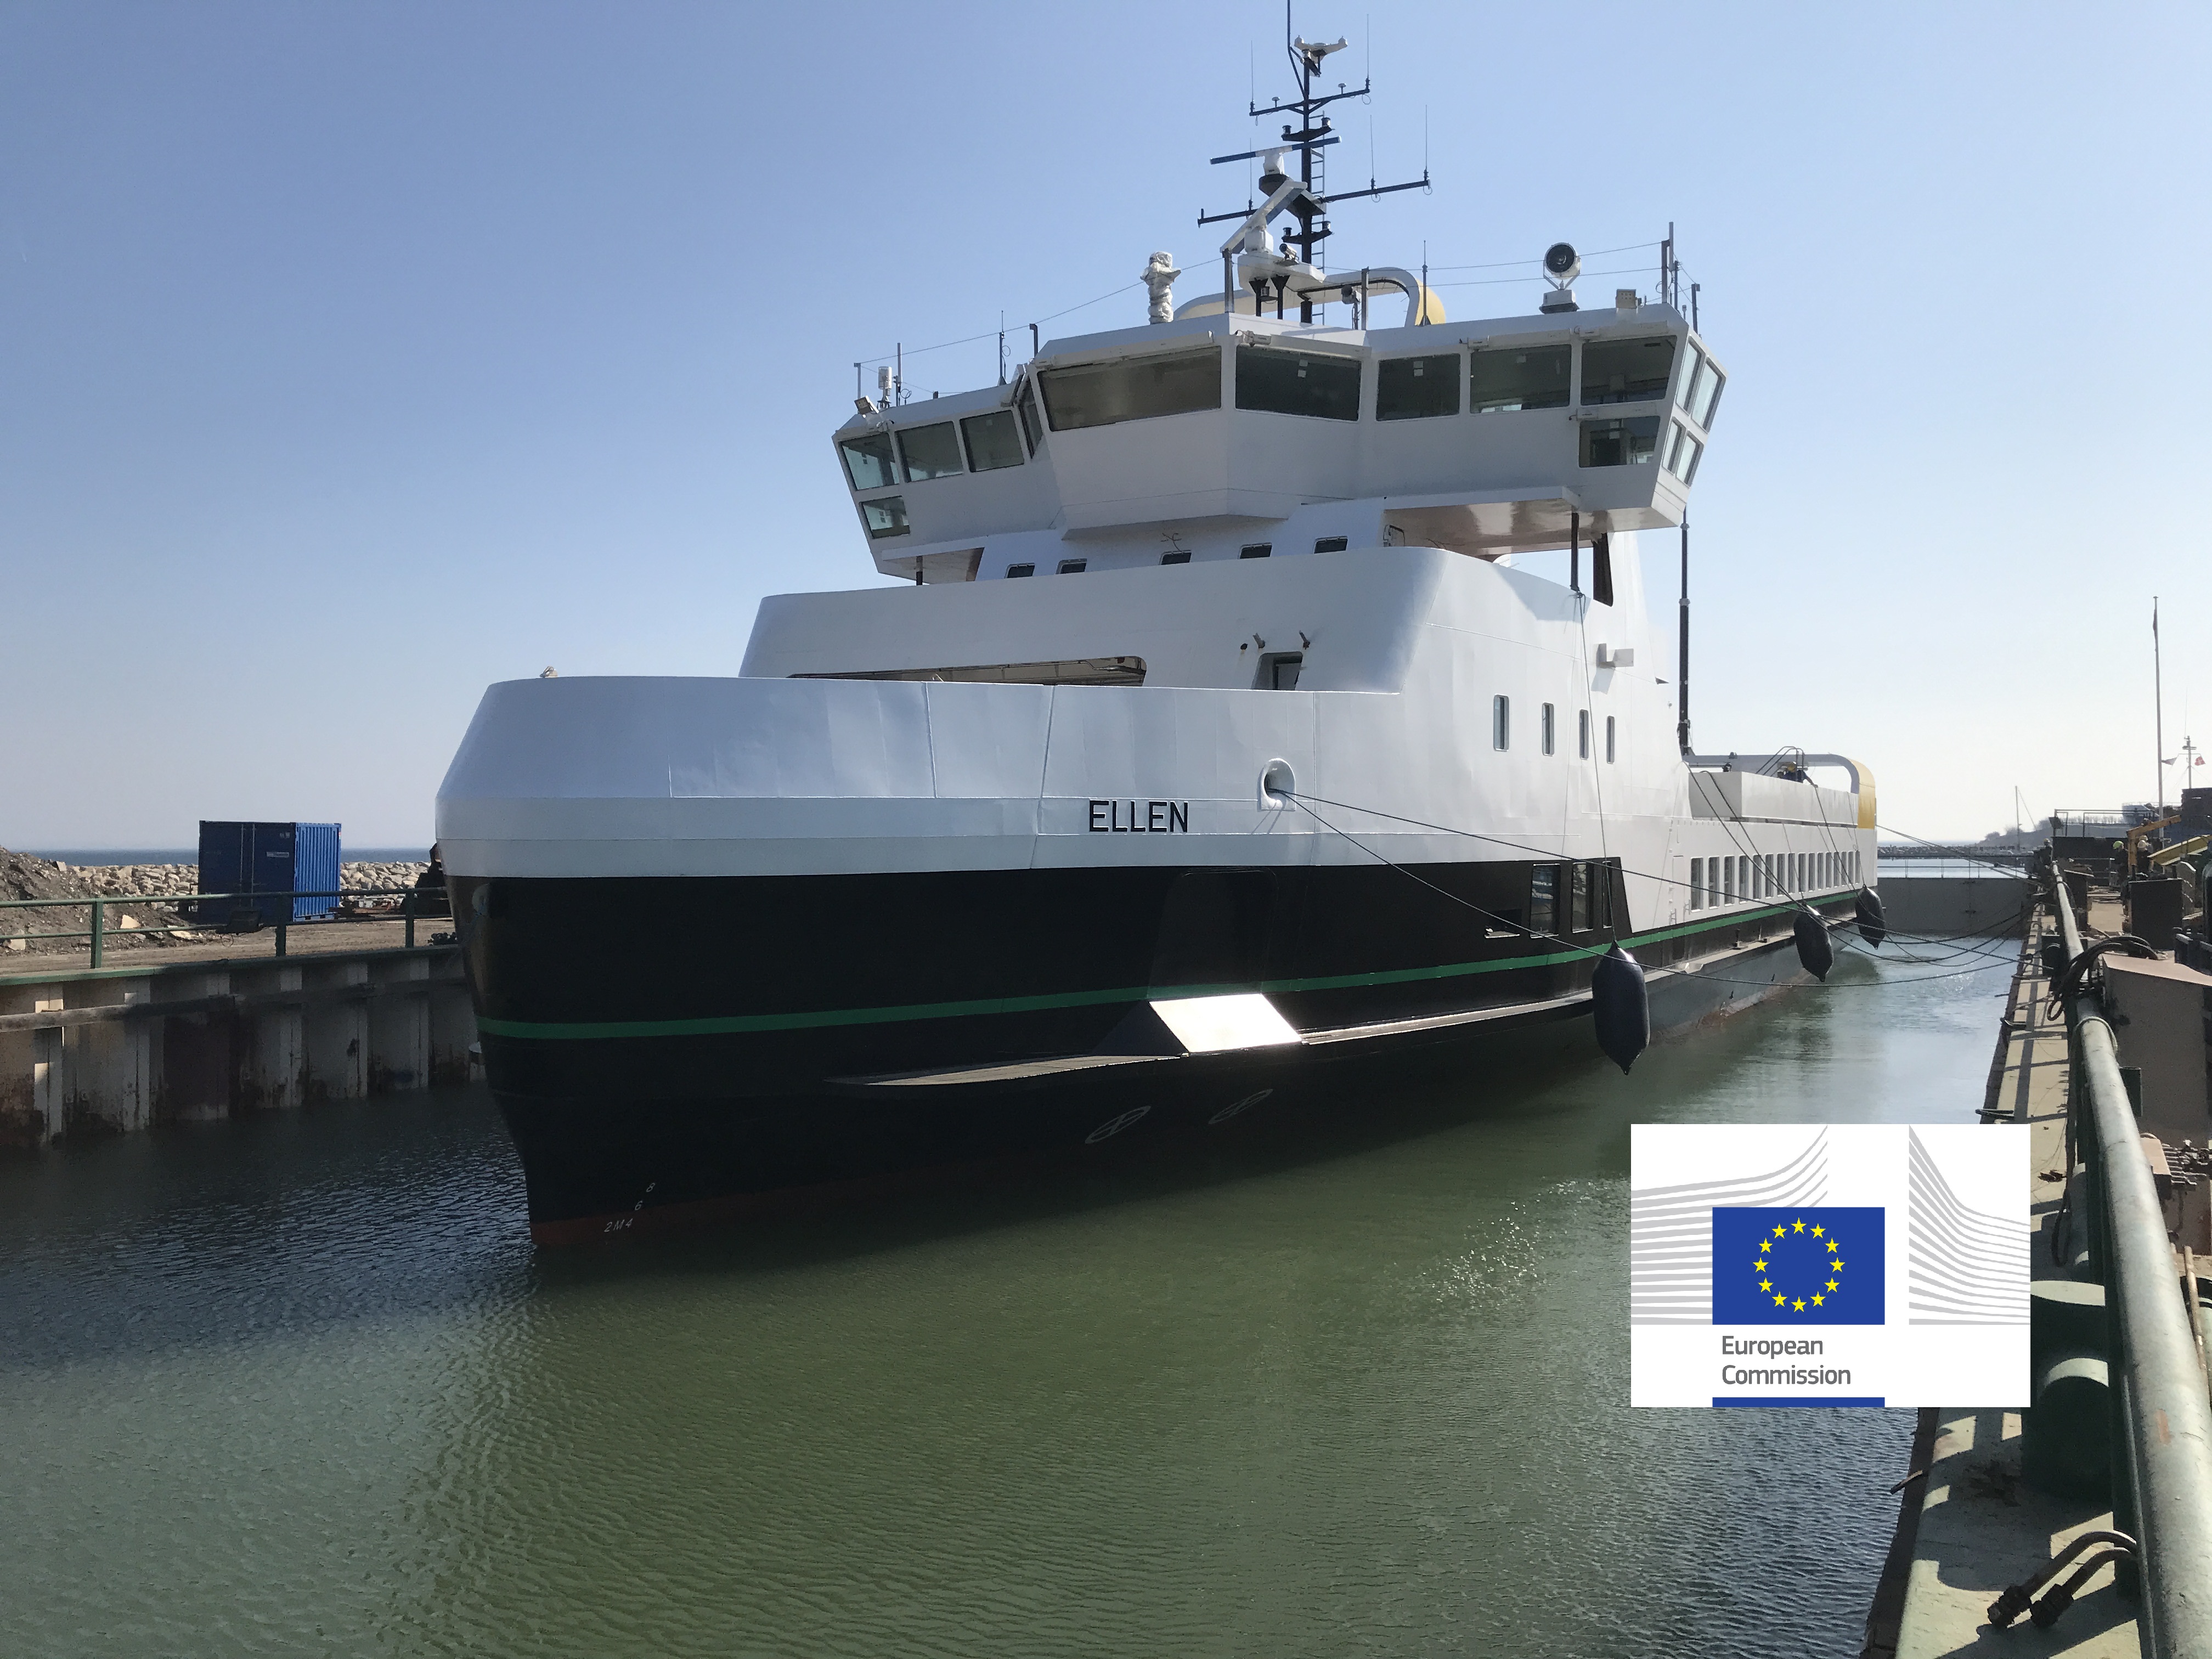 Powered entirely by batteries, the BBC called Ellen “something of a Tesla among ferries”. Fully charged, the 60m/197ft vessel can sail 22 nautical miles with up to 200 passengers and 30 cars onboard. That's a roughly 40km (25-mile) round-trip, and seven times further than other electric ferries.